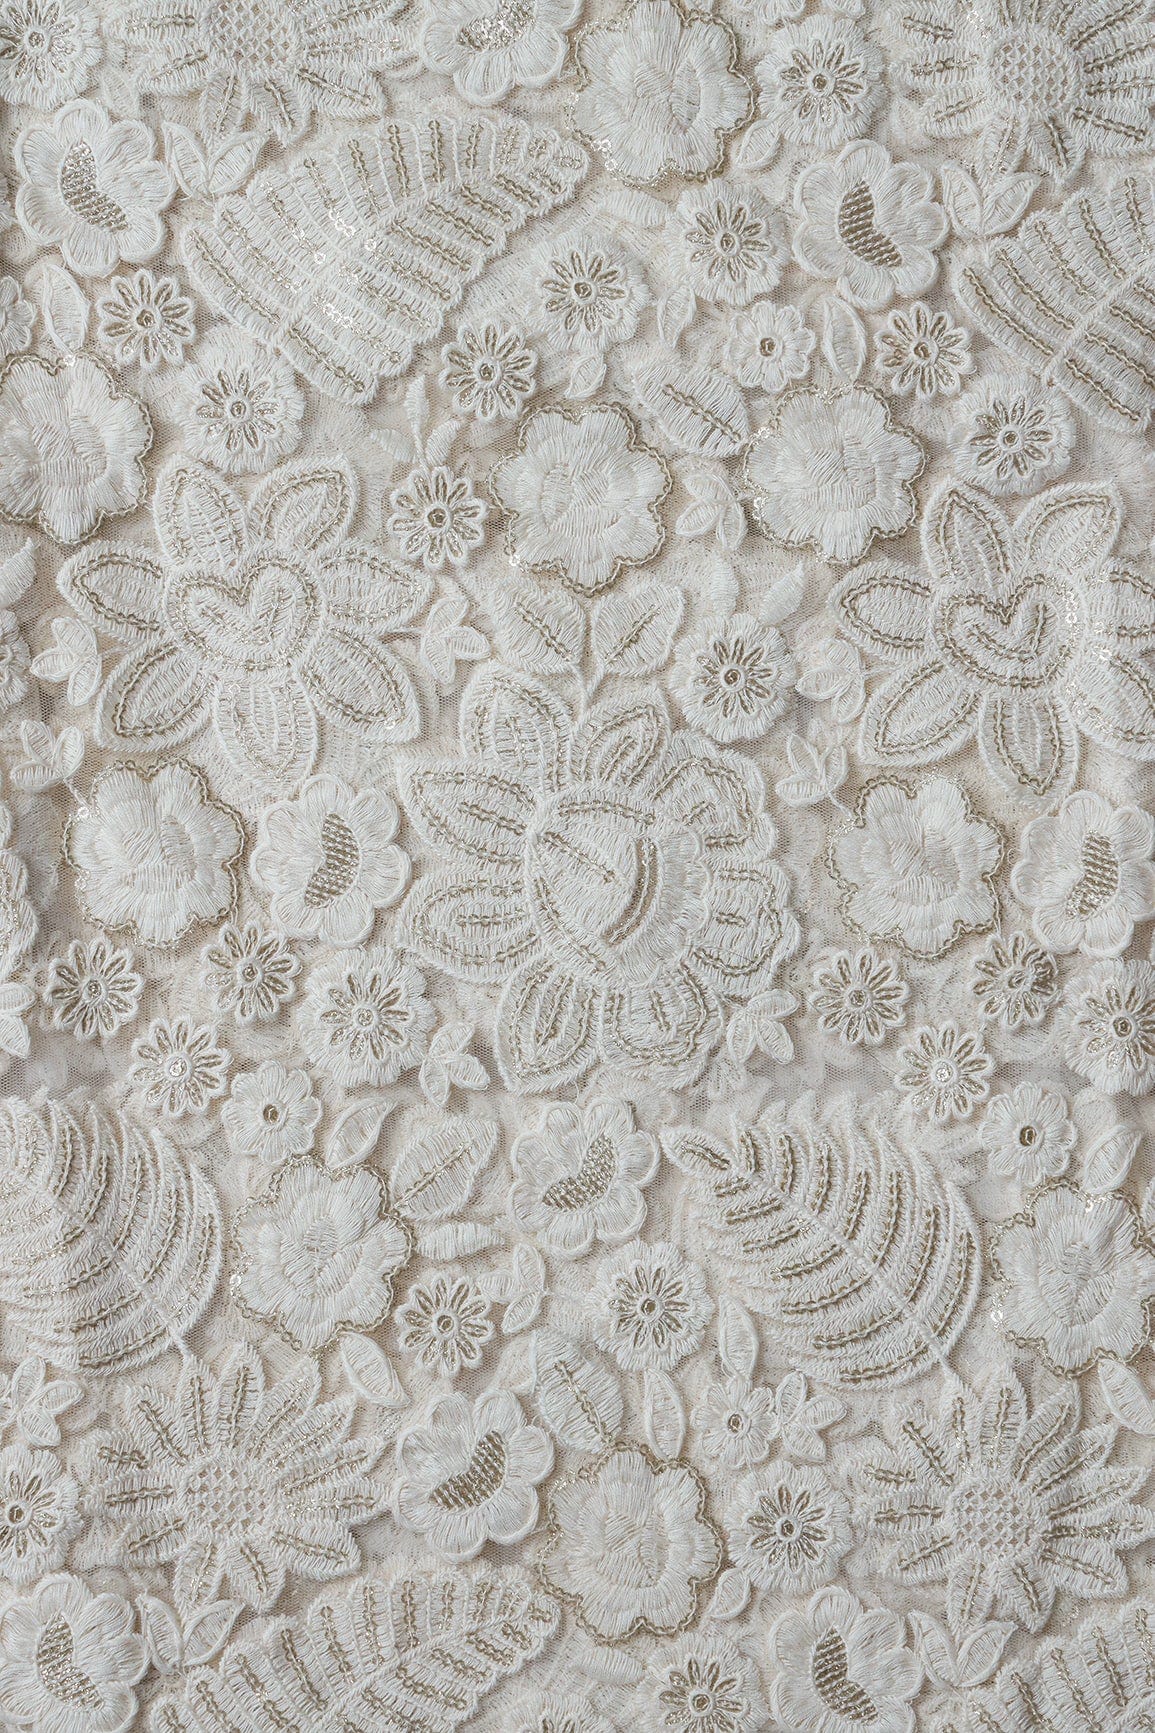 doeraa Embroidery Fabrics White Thread With Gold Sequins Awesome Floral Embroidery Work On White Soft Net Fabric